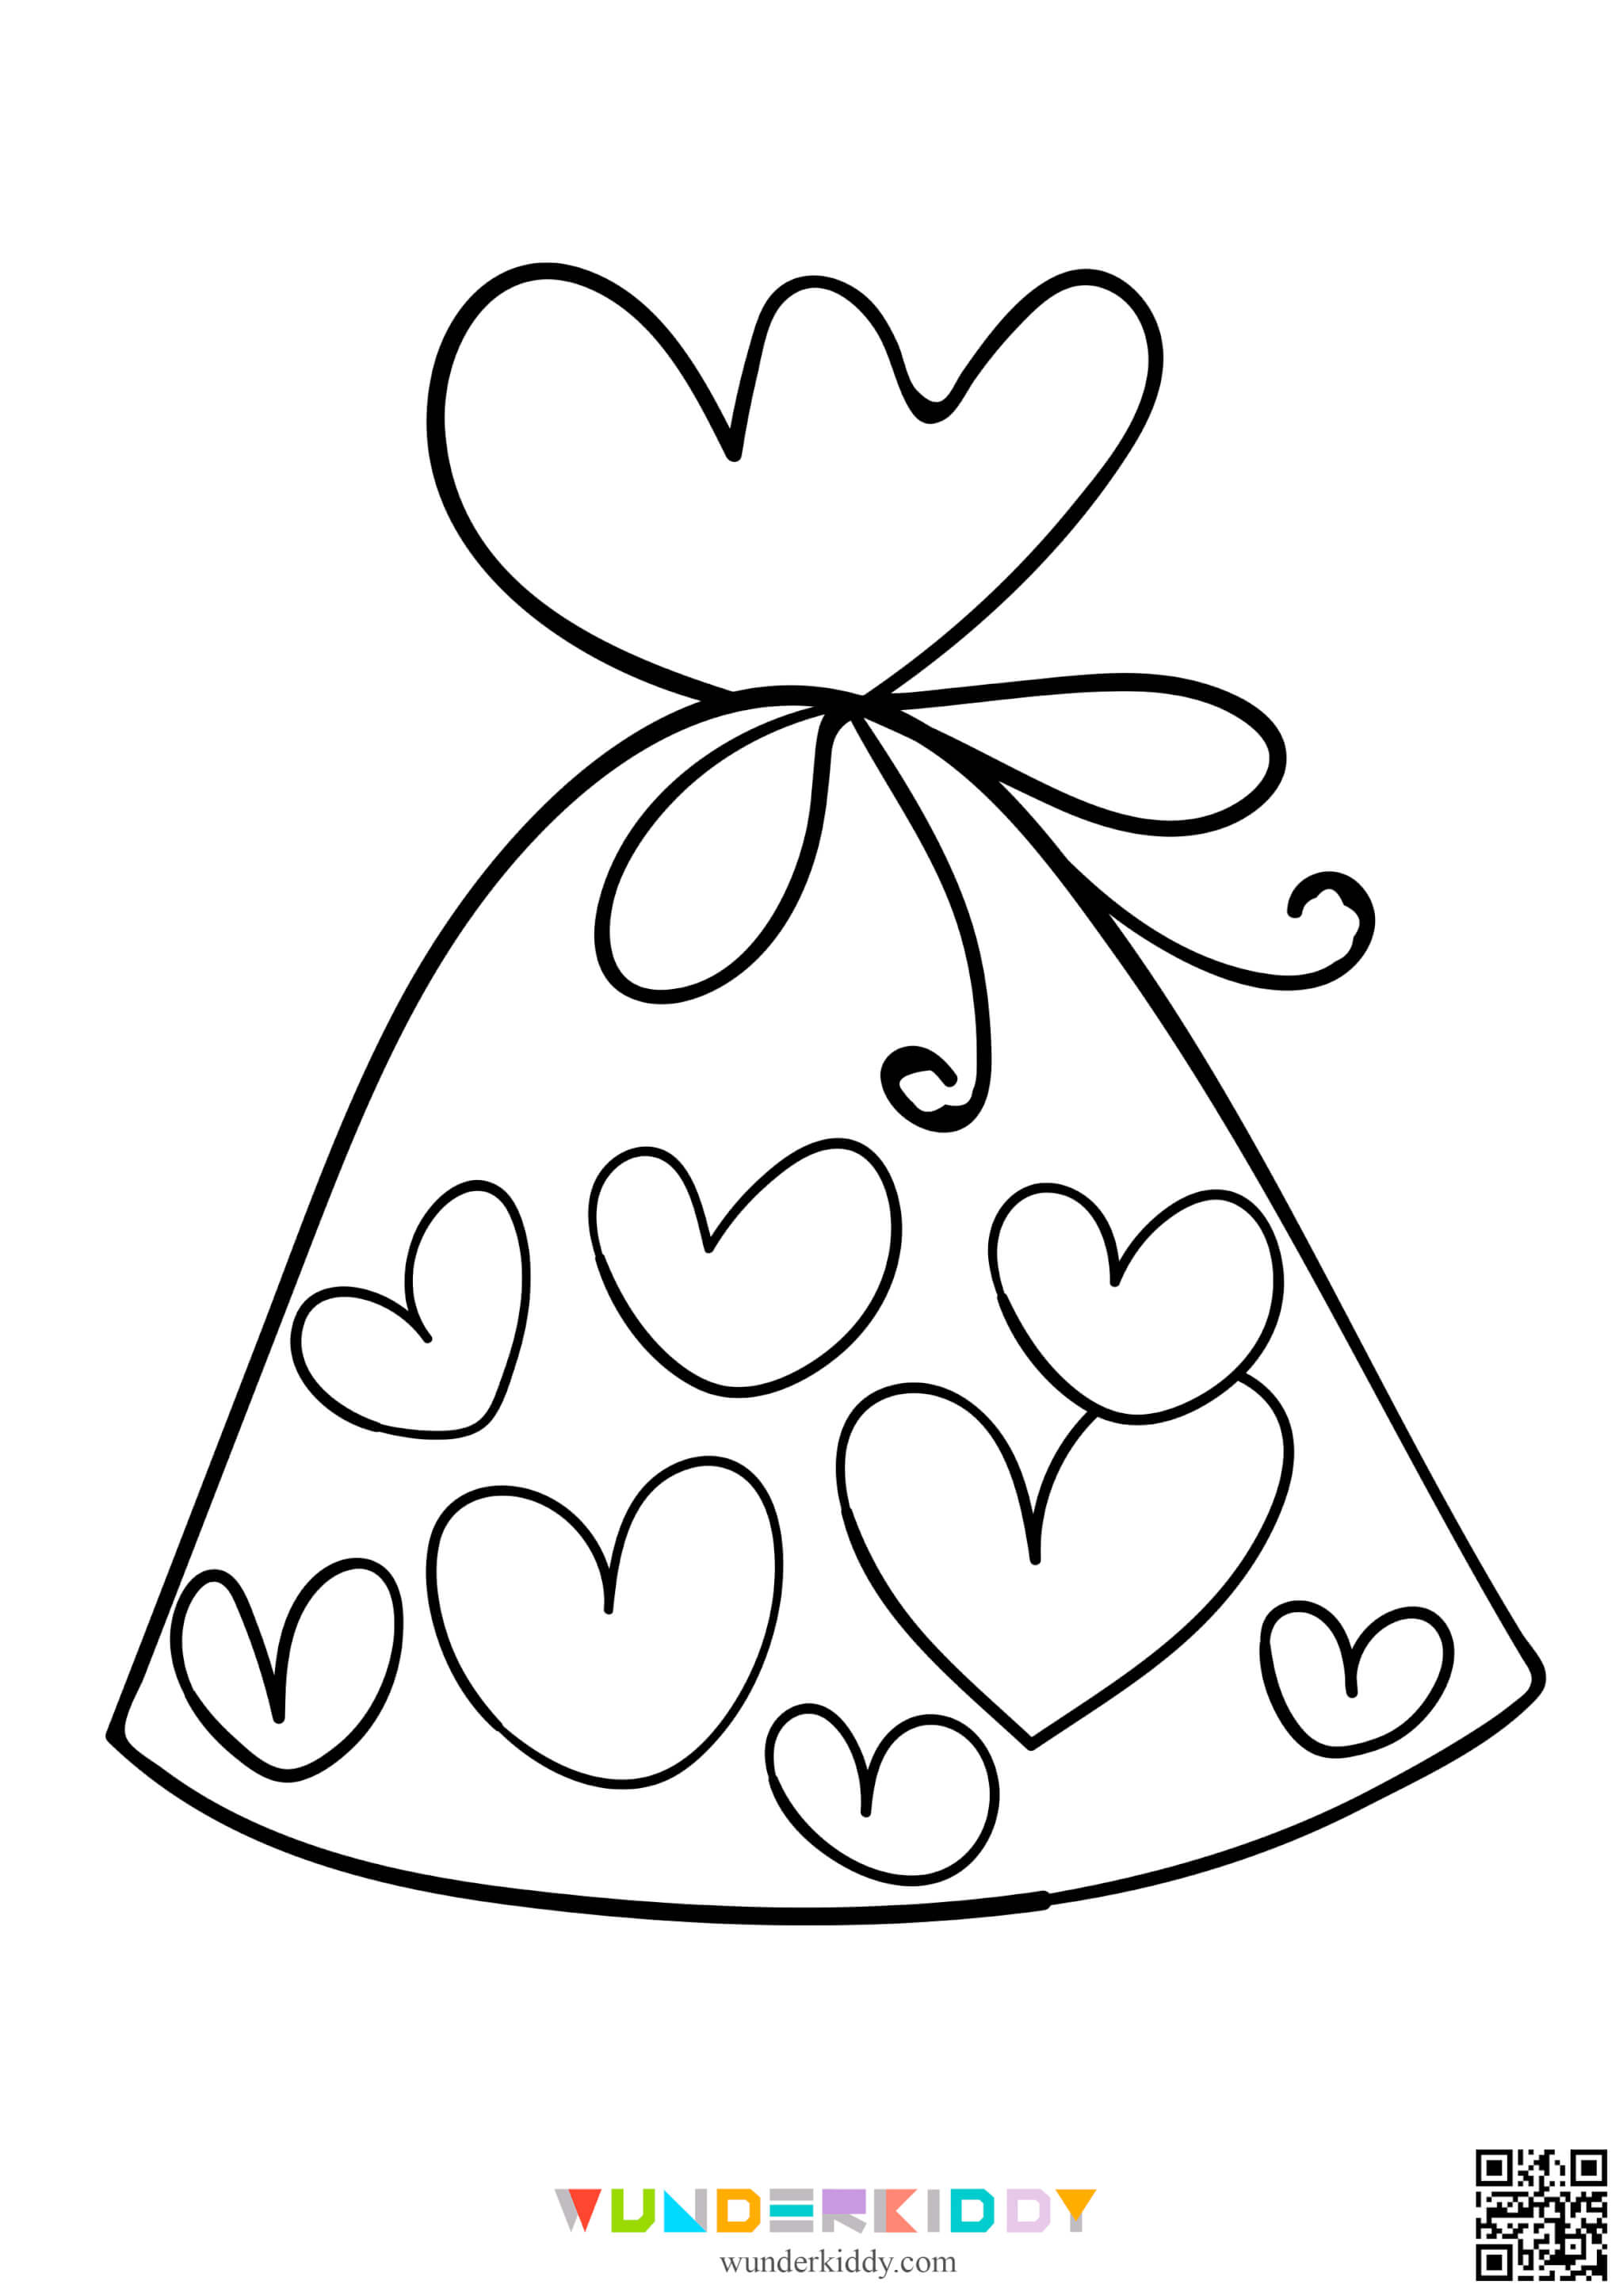 Valentines Coloring Pages - Image 15